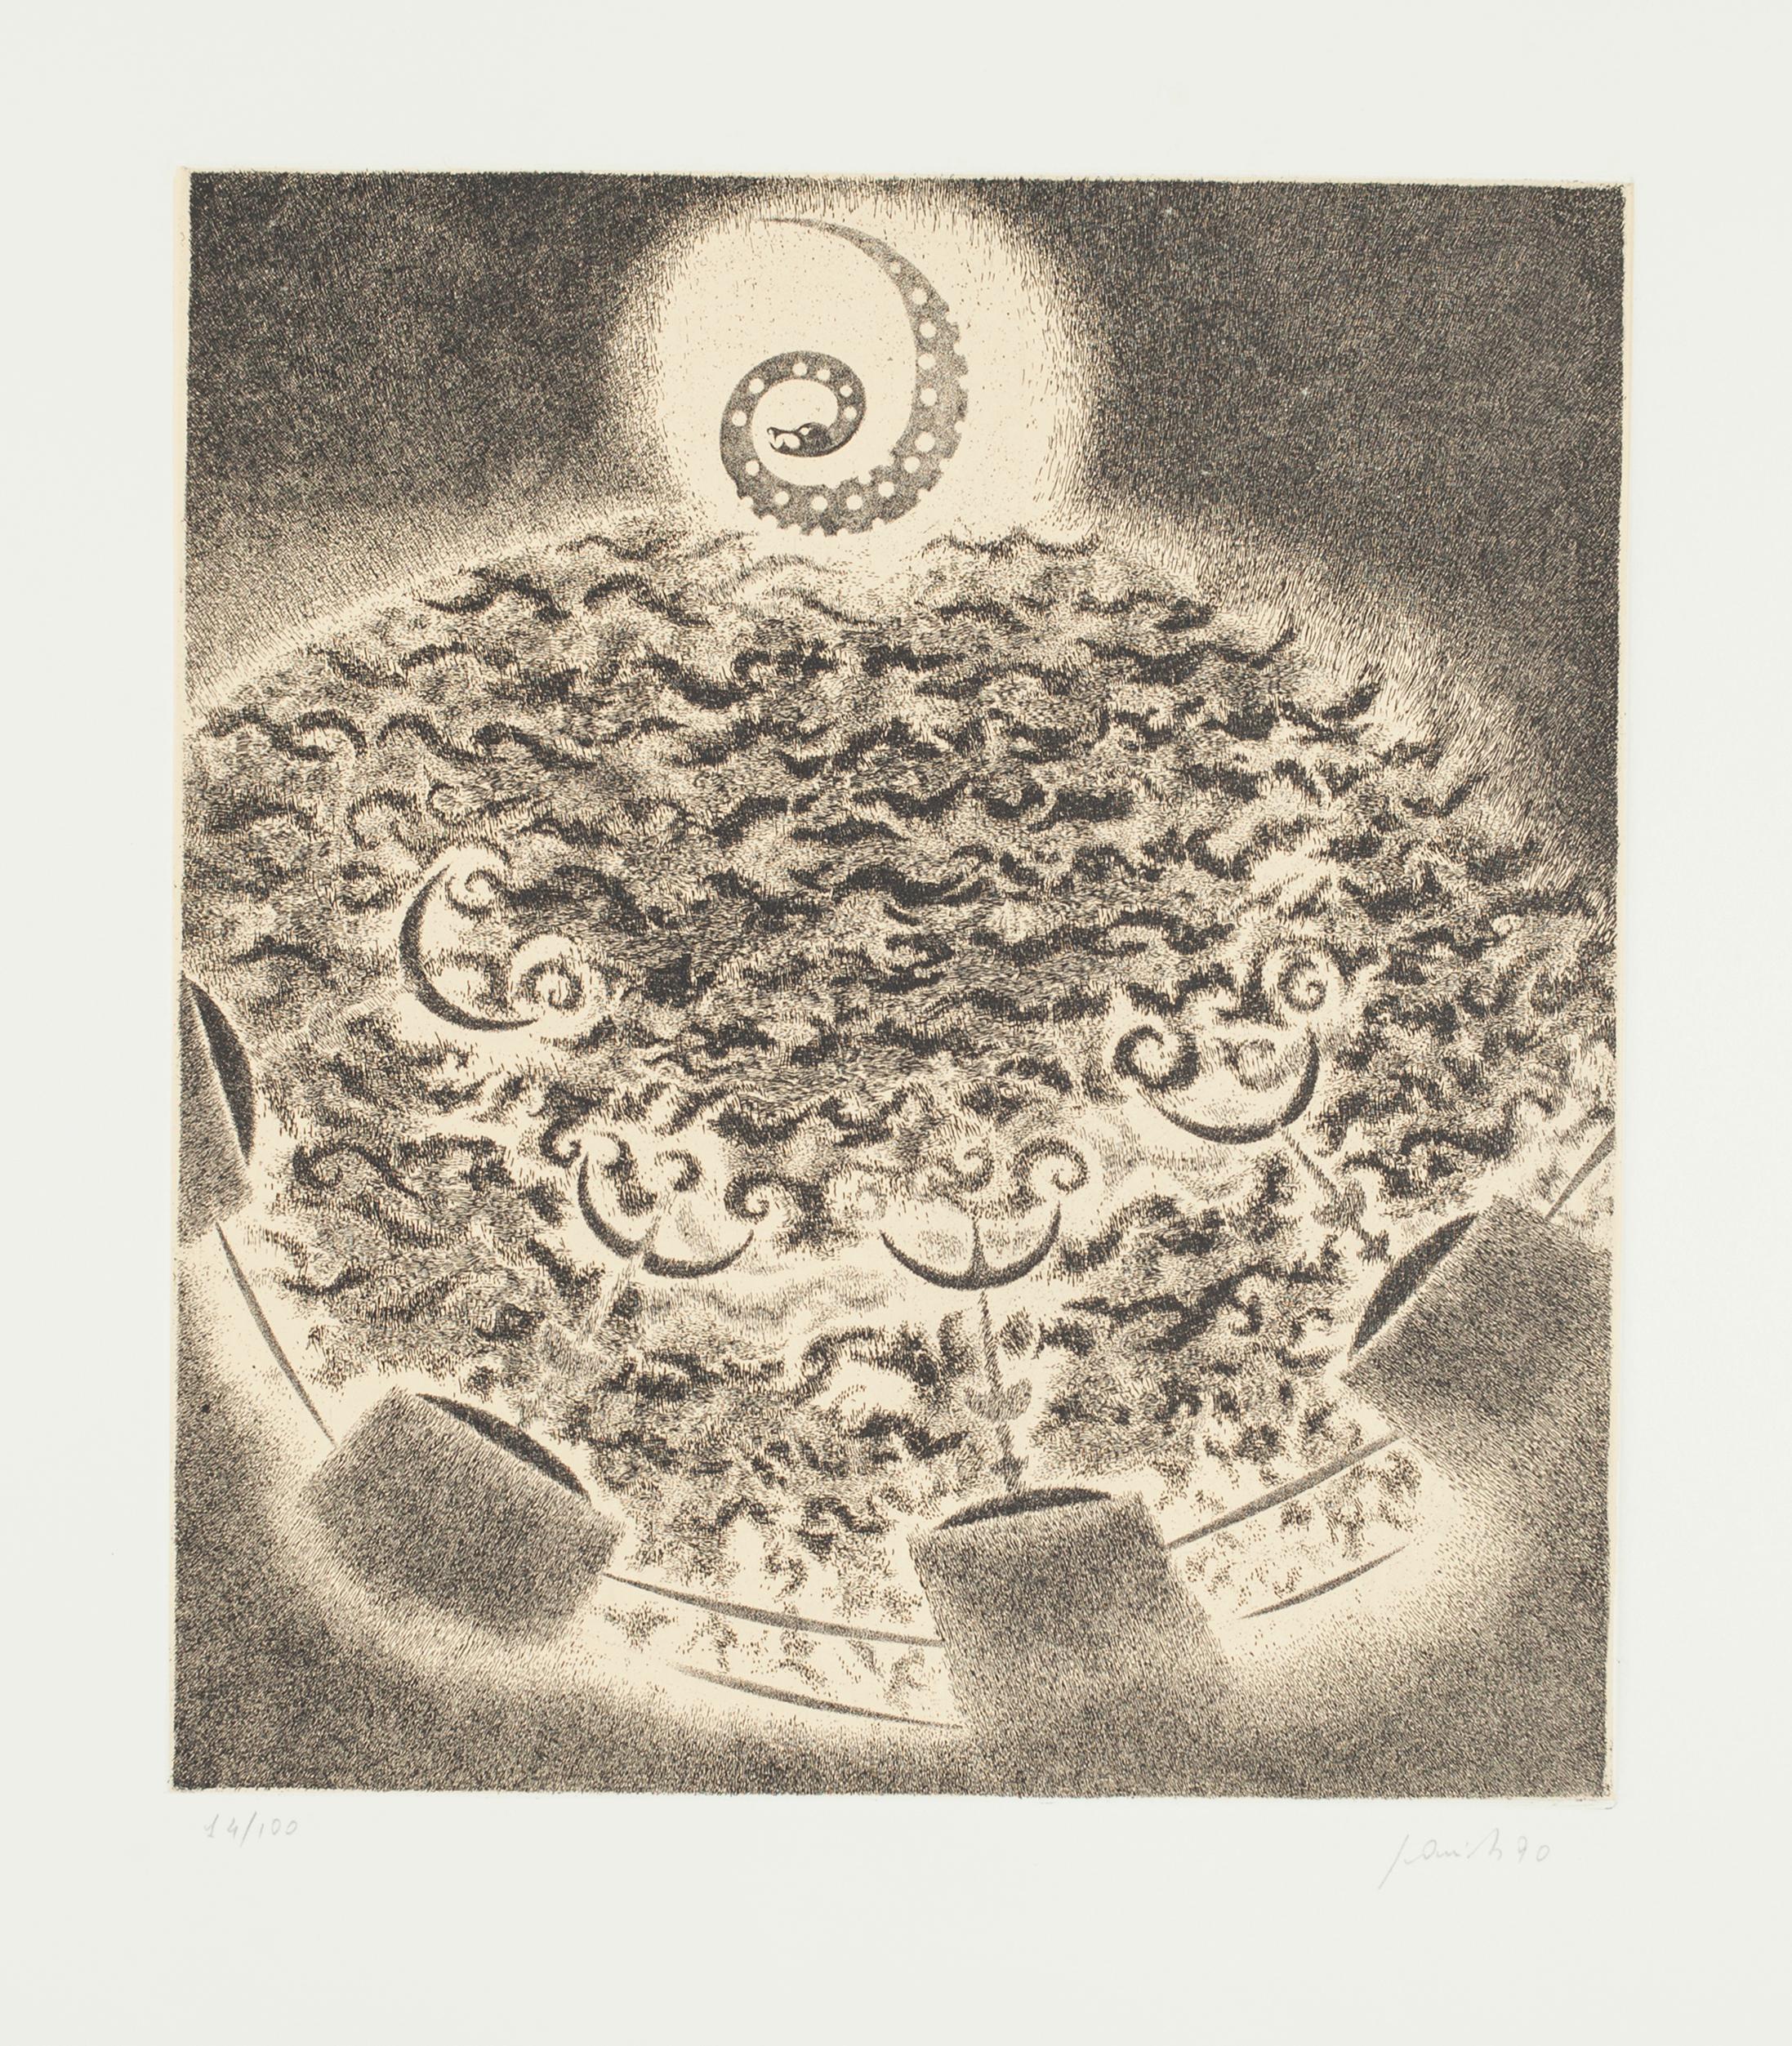 Spiral is an original, splendid etching and drypoint realized by Edo Janich in 1990.

The state of preservation of the artwork is excellent. 

hand-signed numbered14/100.

Image dimension: 30 x 27 cm.

The artwork represents a scenery of Spiral, the